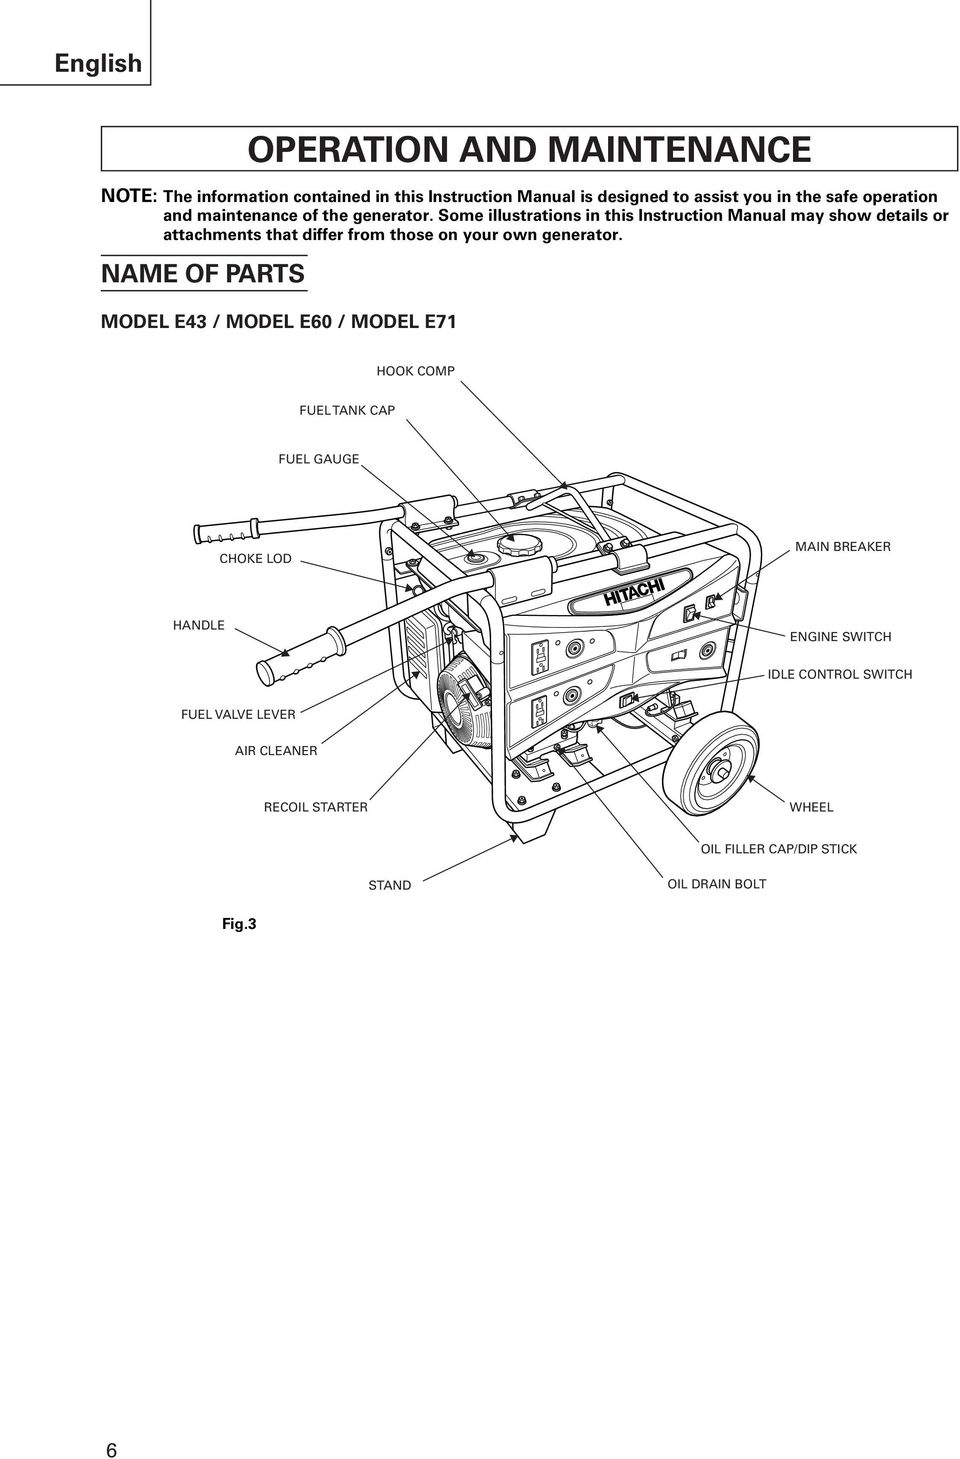 Some illustrations in this Instruction Manual may show details or attachments that differ from those on your own generator.